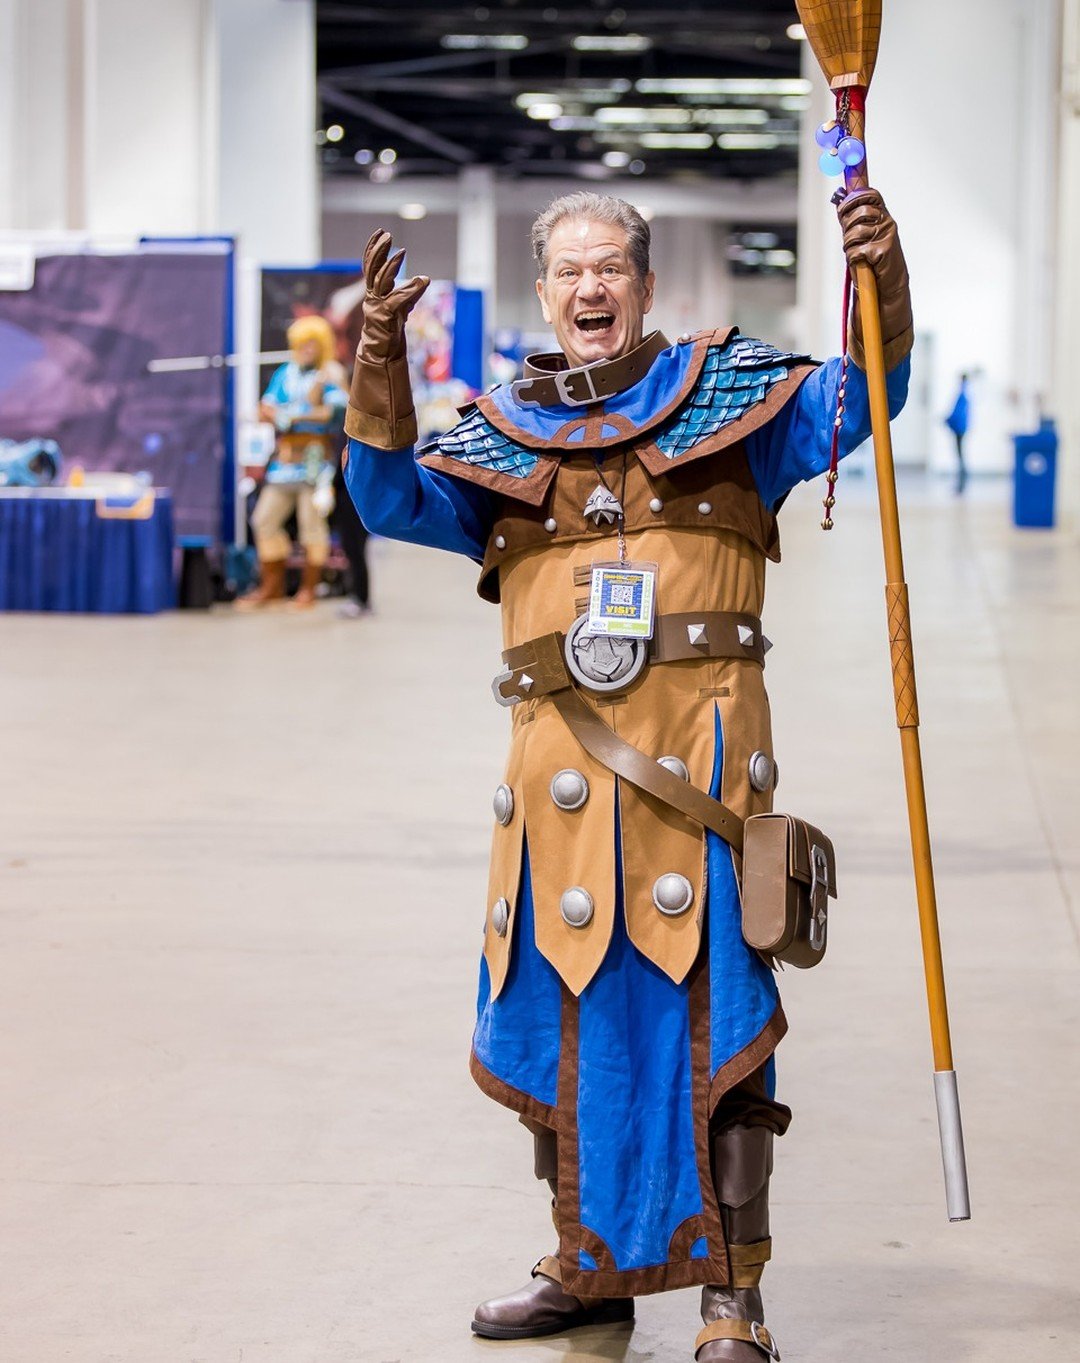 Khadgar learns there will be no Blizzcon this year...

Photo: @roberttphotography

#khadgar #khadgarcosplay #blizzardcosplay #wowcosplay #worldofwarcraftcosplay #wondercon2024 #wondercon2024cosplay #dadgar